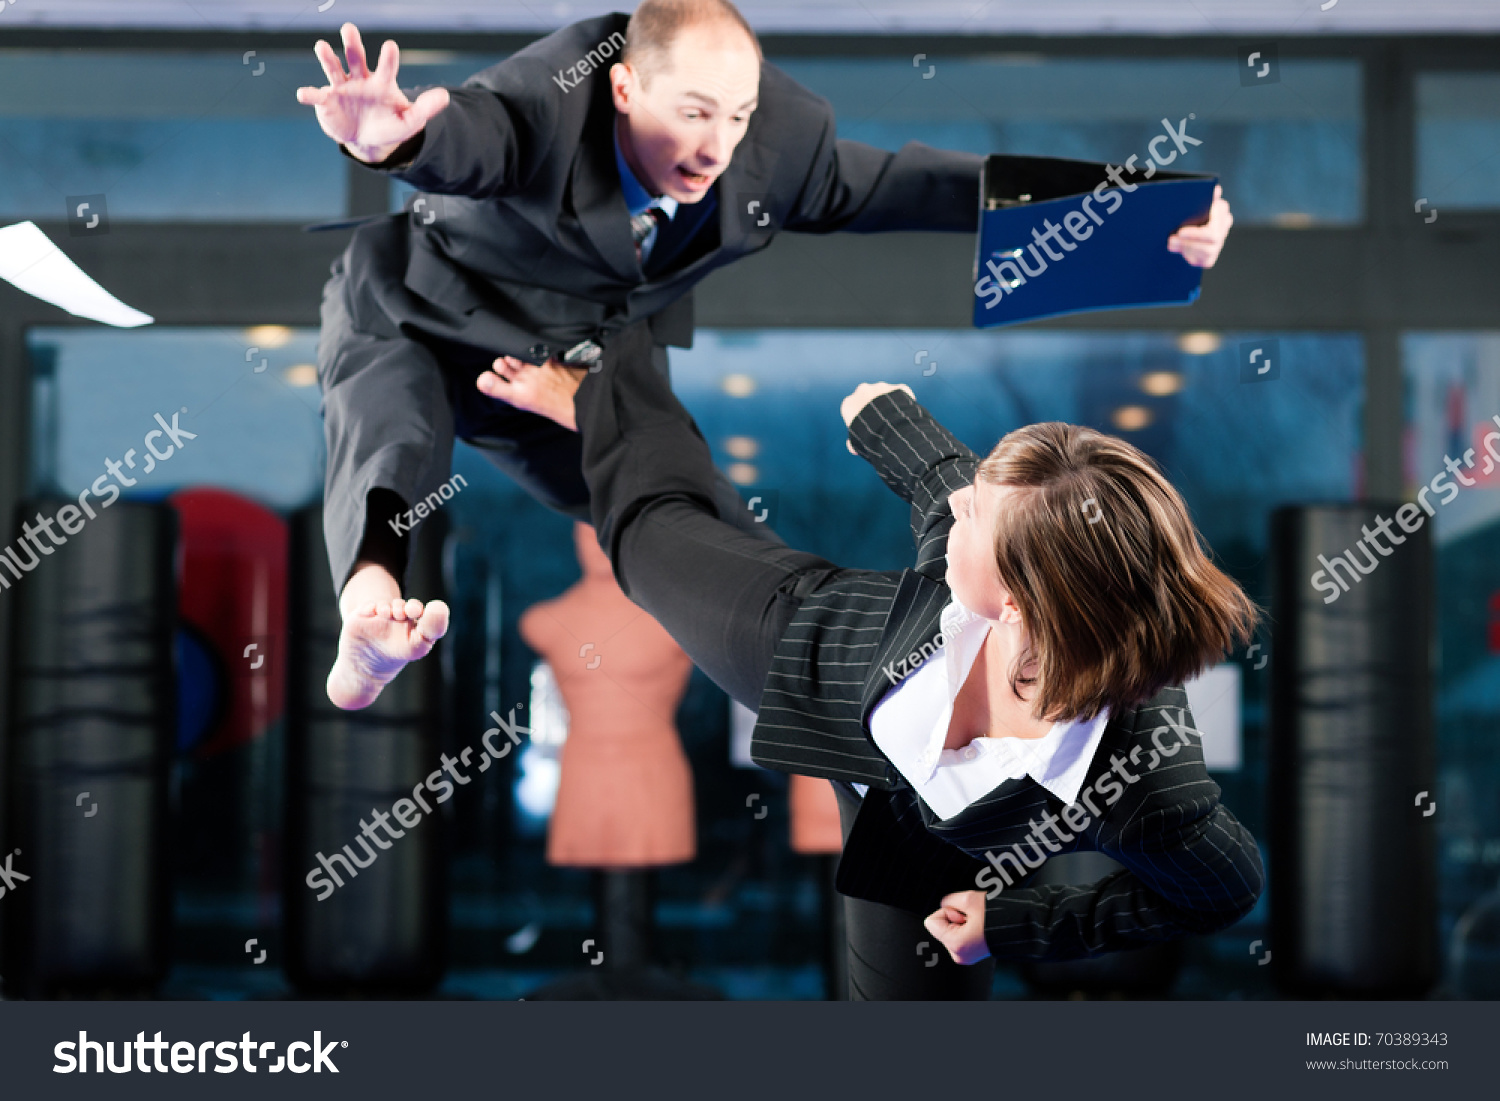 Business concept - People in a gym in martial arts training exercising Taekwondo, both wearing suits #70389343